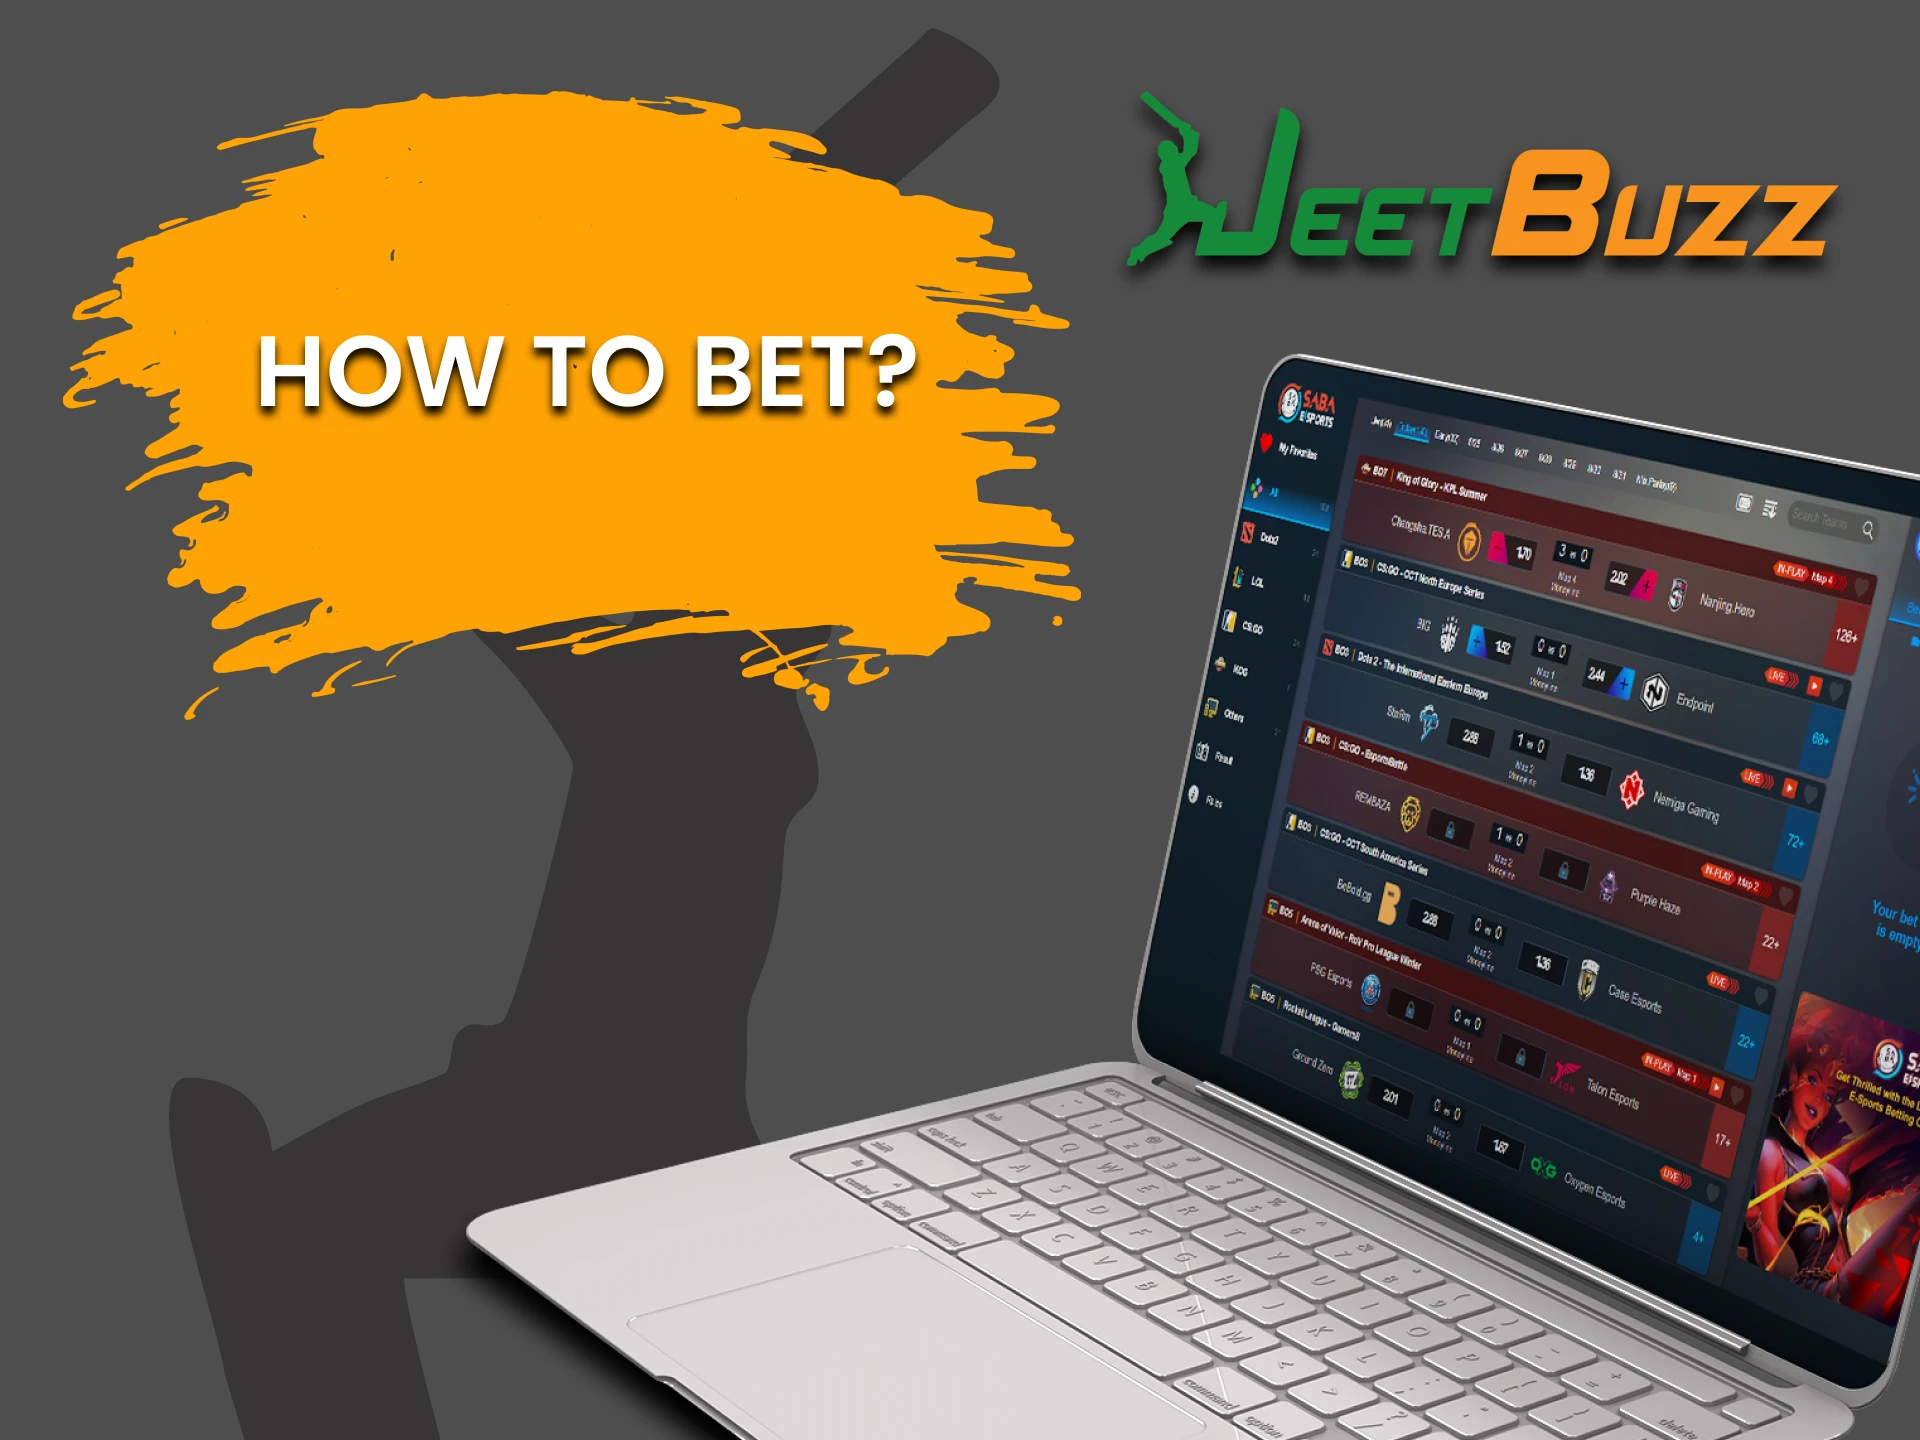 Go to the esports betting section on JeetBuzz.